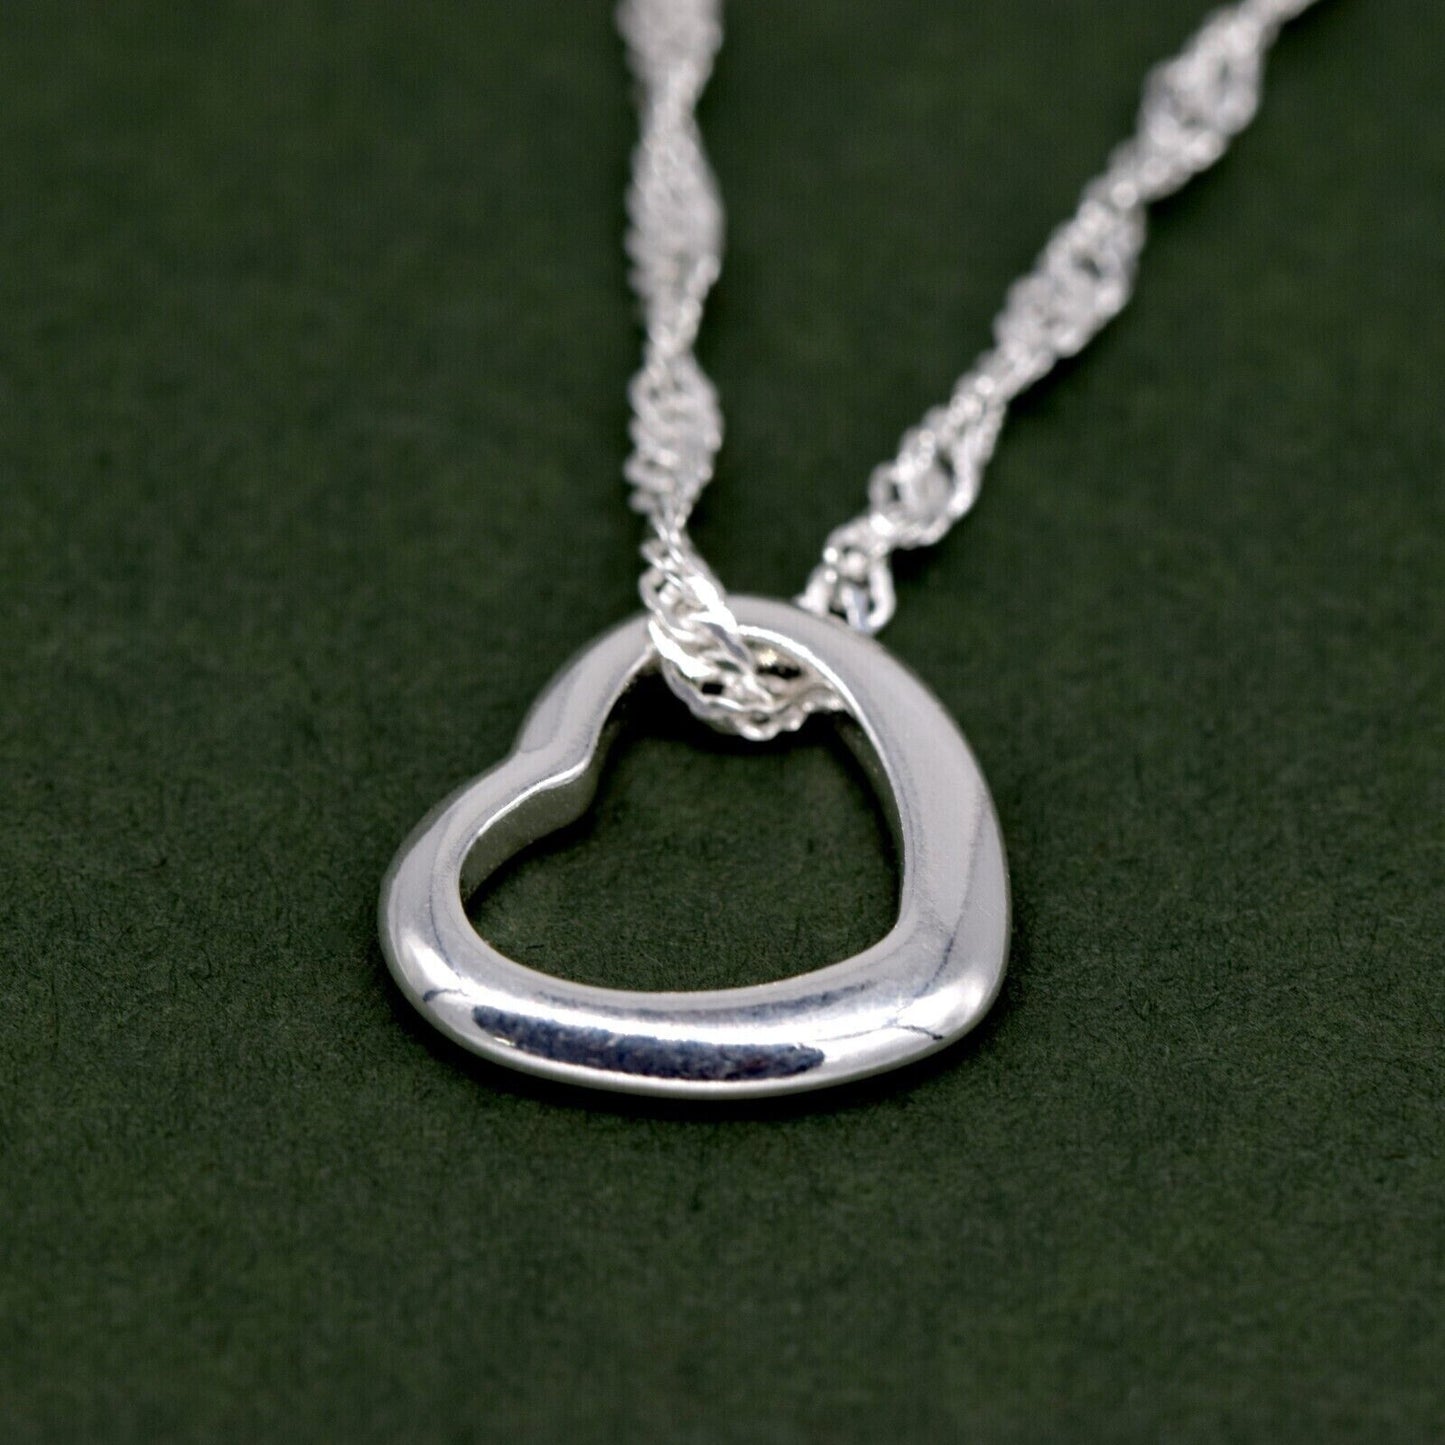 Genuine 925 Sterling Silver Floating Heart Pendant Necklace on Singapore Chain